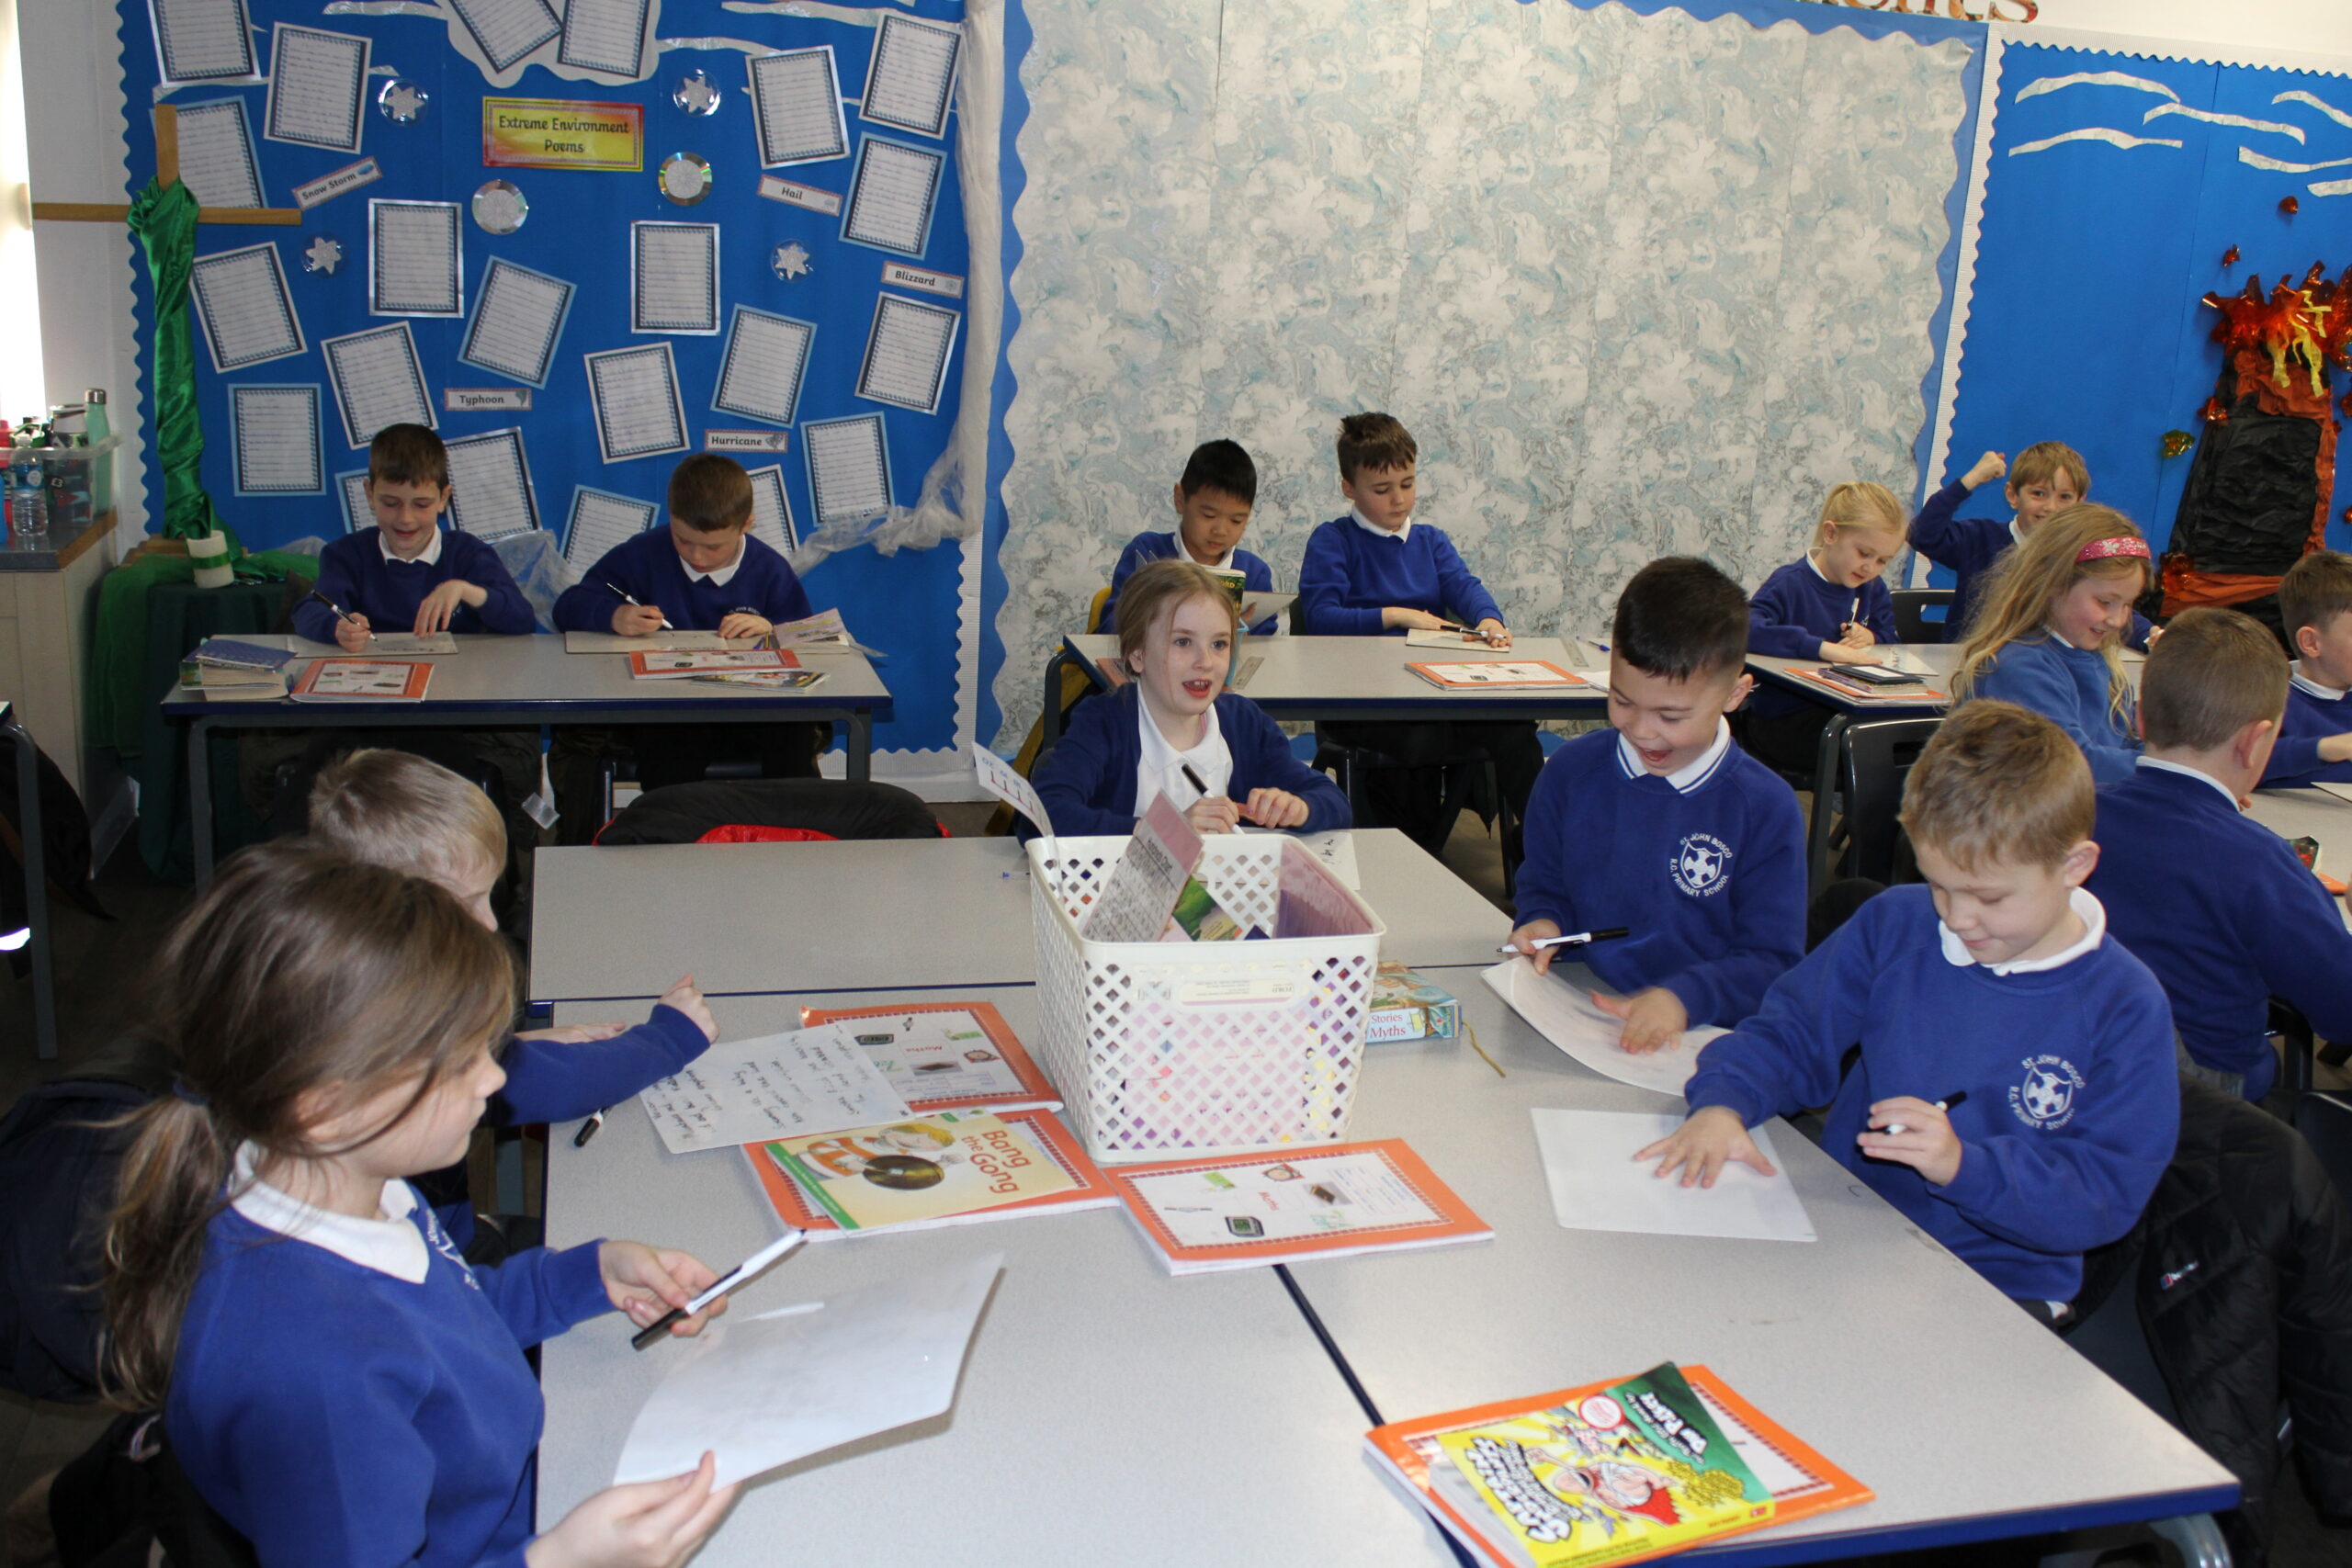 pupils in a classroom doing lesson at their desk